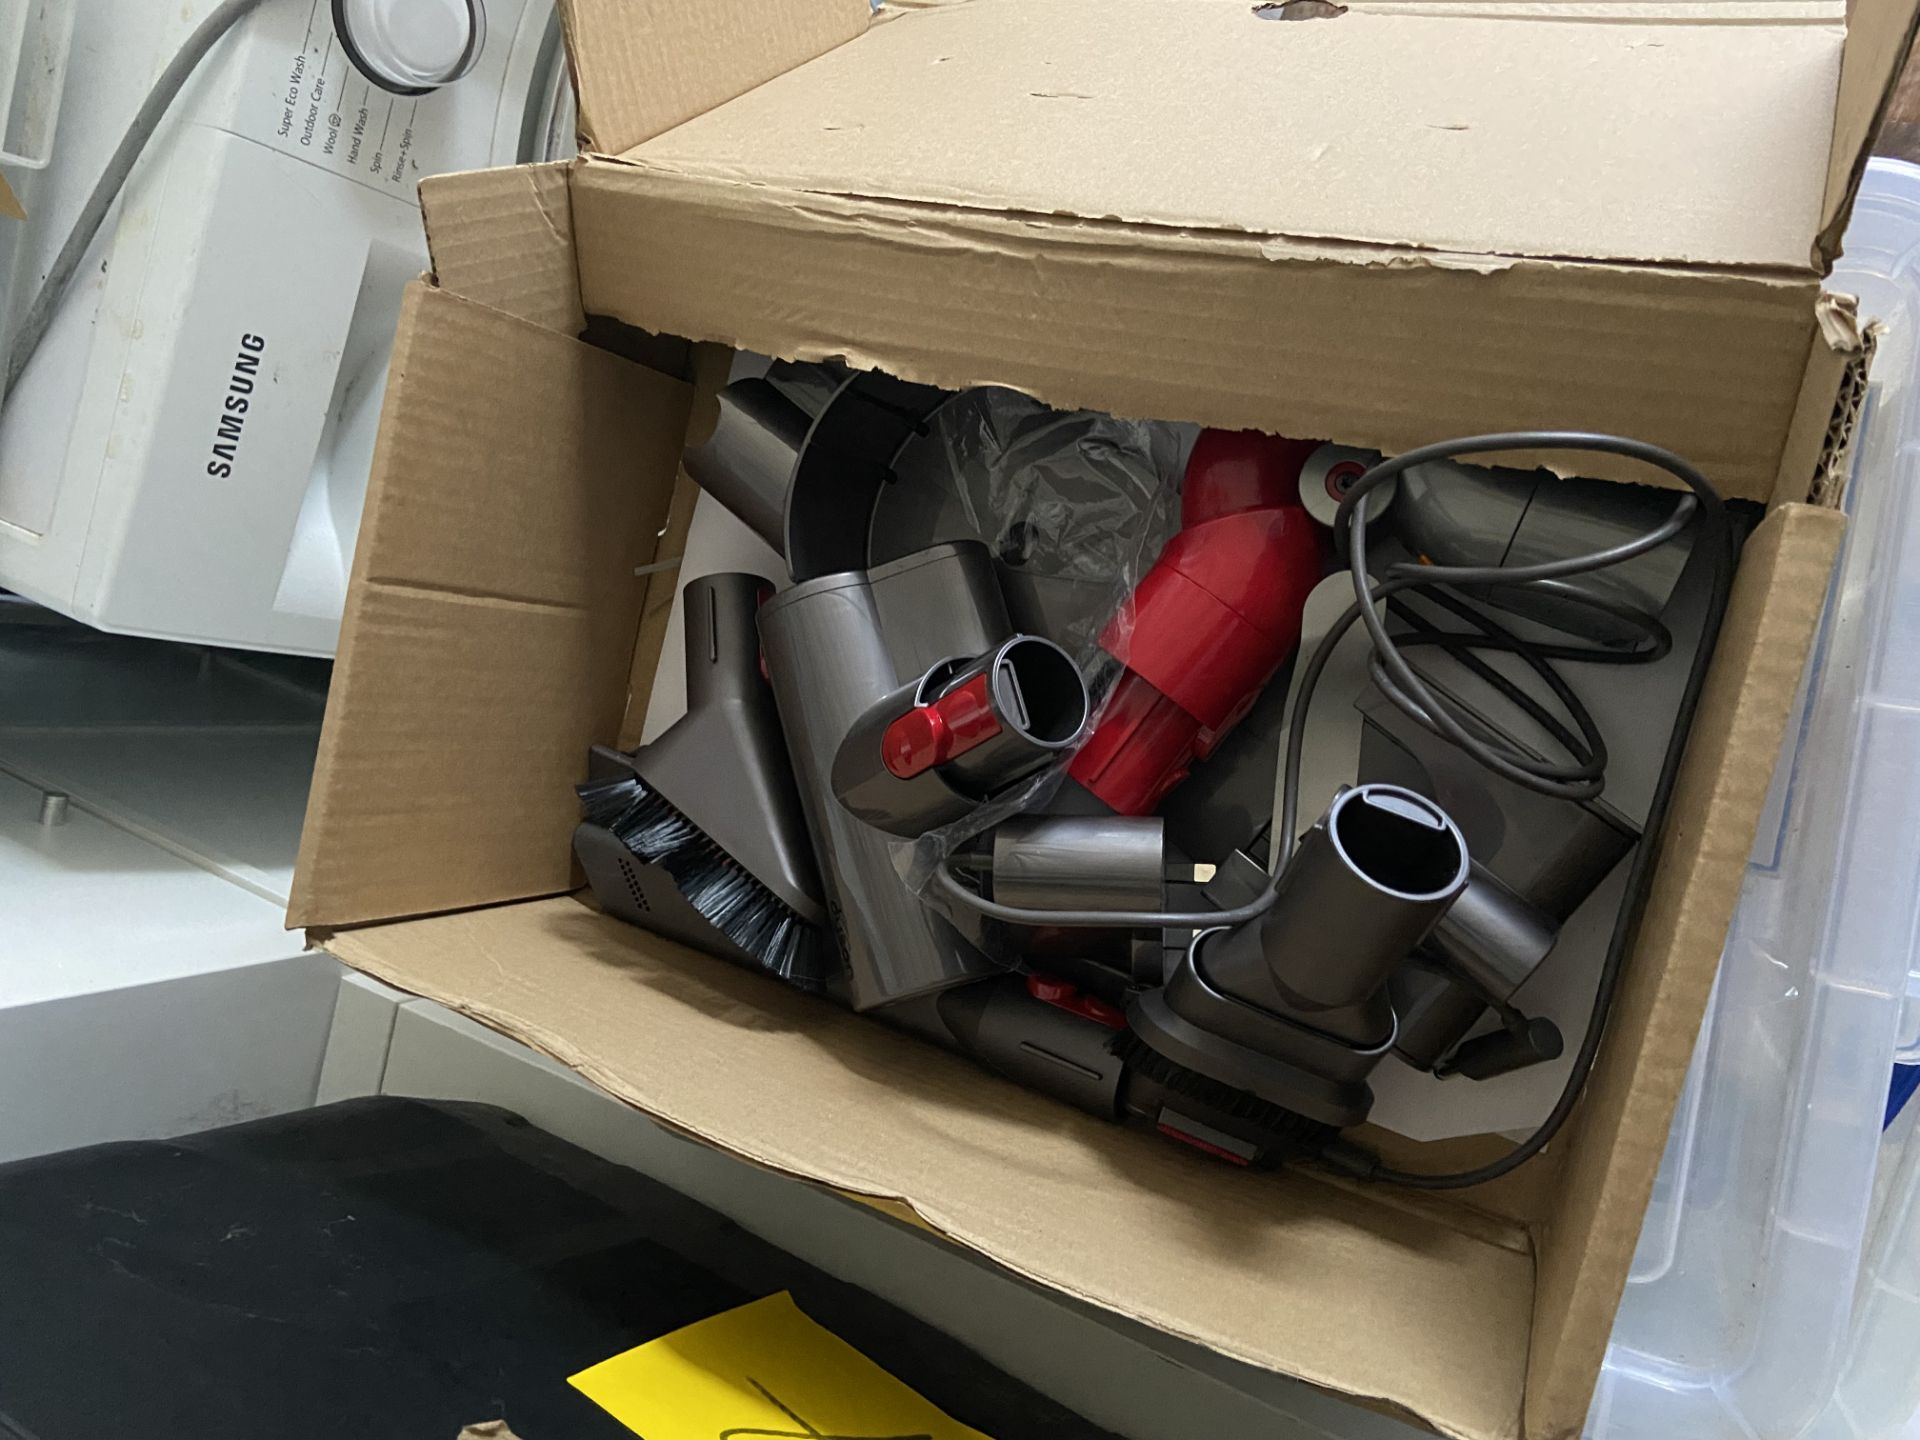 Dyson Cordless Vacuum Cleaner, with Dyson parts and accessories, in cardboard box Please read the - Image 2 of 2